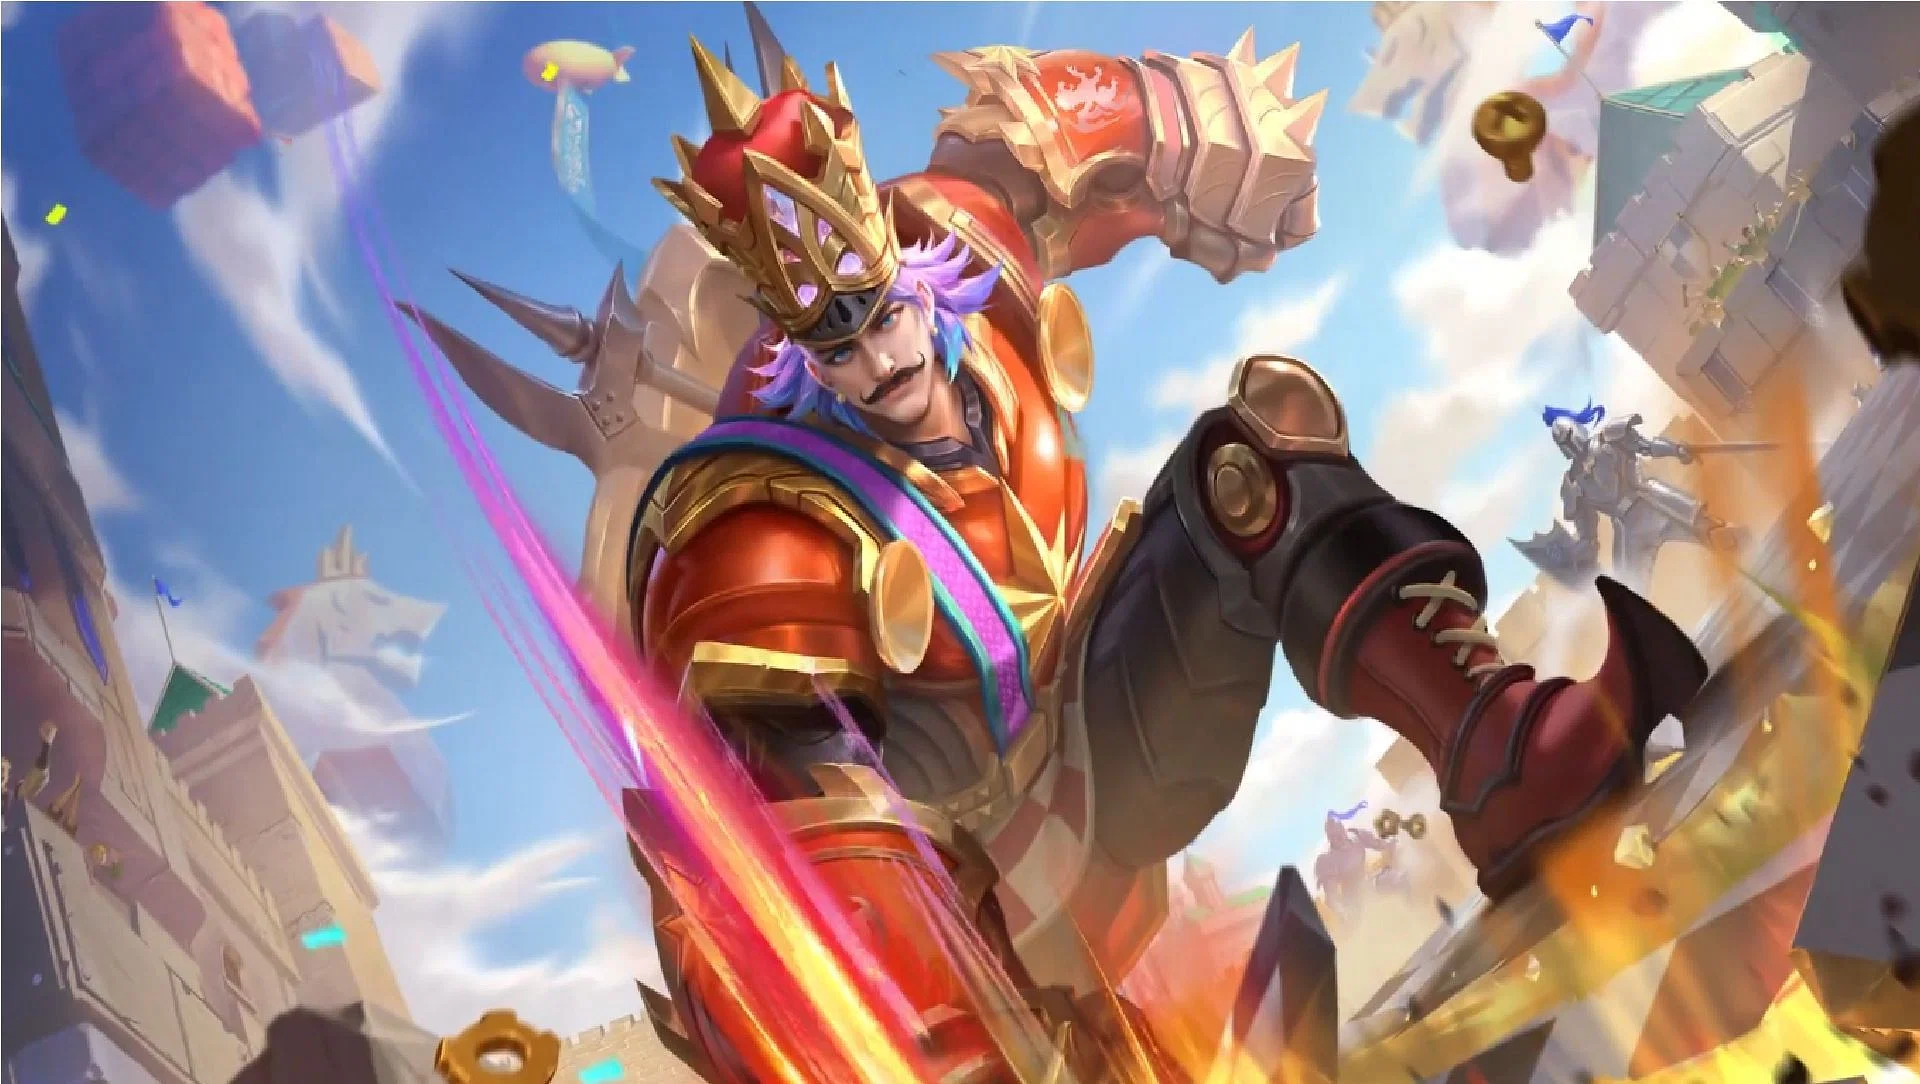 Mobile Legends: Starlight Pass for Gatotkaca! Skin, Emotes and More Rewards